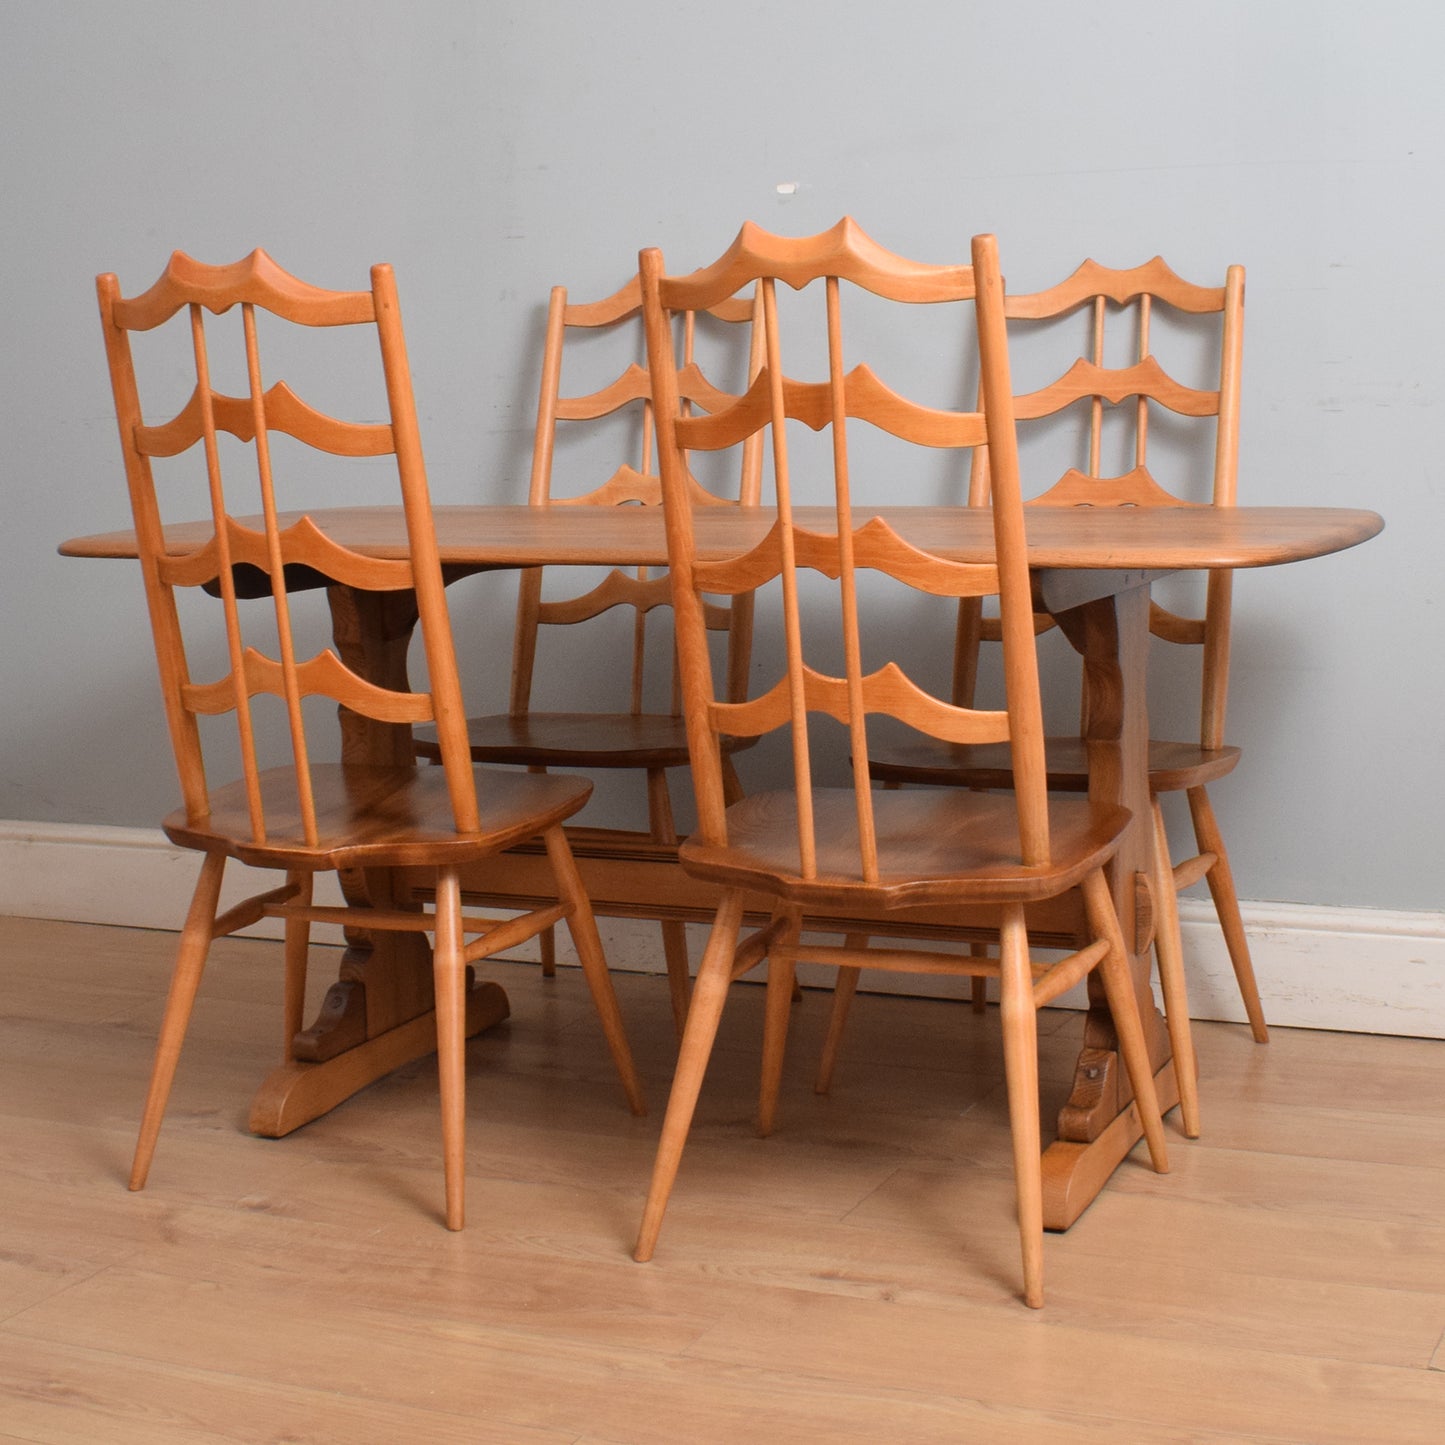 Ercol Trestle Table and Four 'Batwing' Chairs